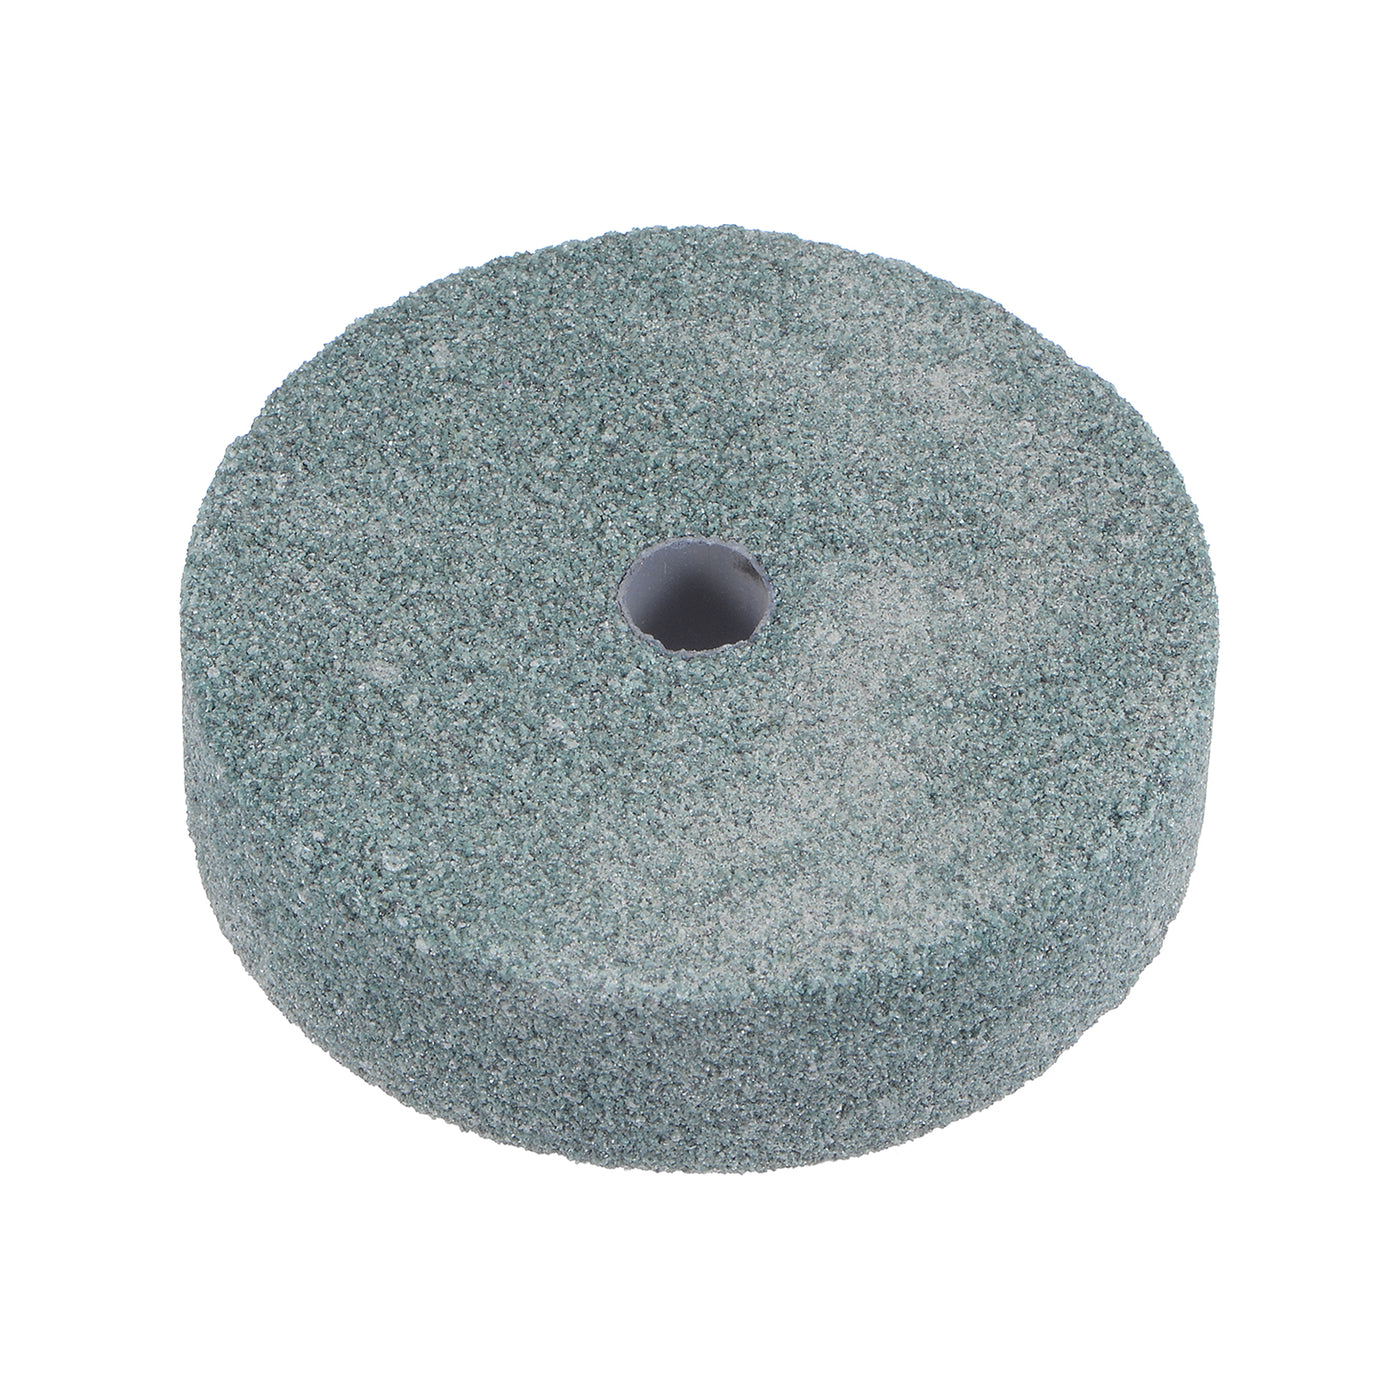 uxcell Uxcell Mounted Grinding Stone 2.9-inch Dia Silicon Chloride Grinding Wheel